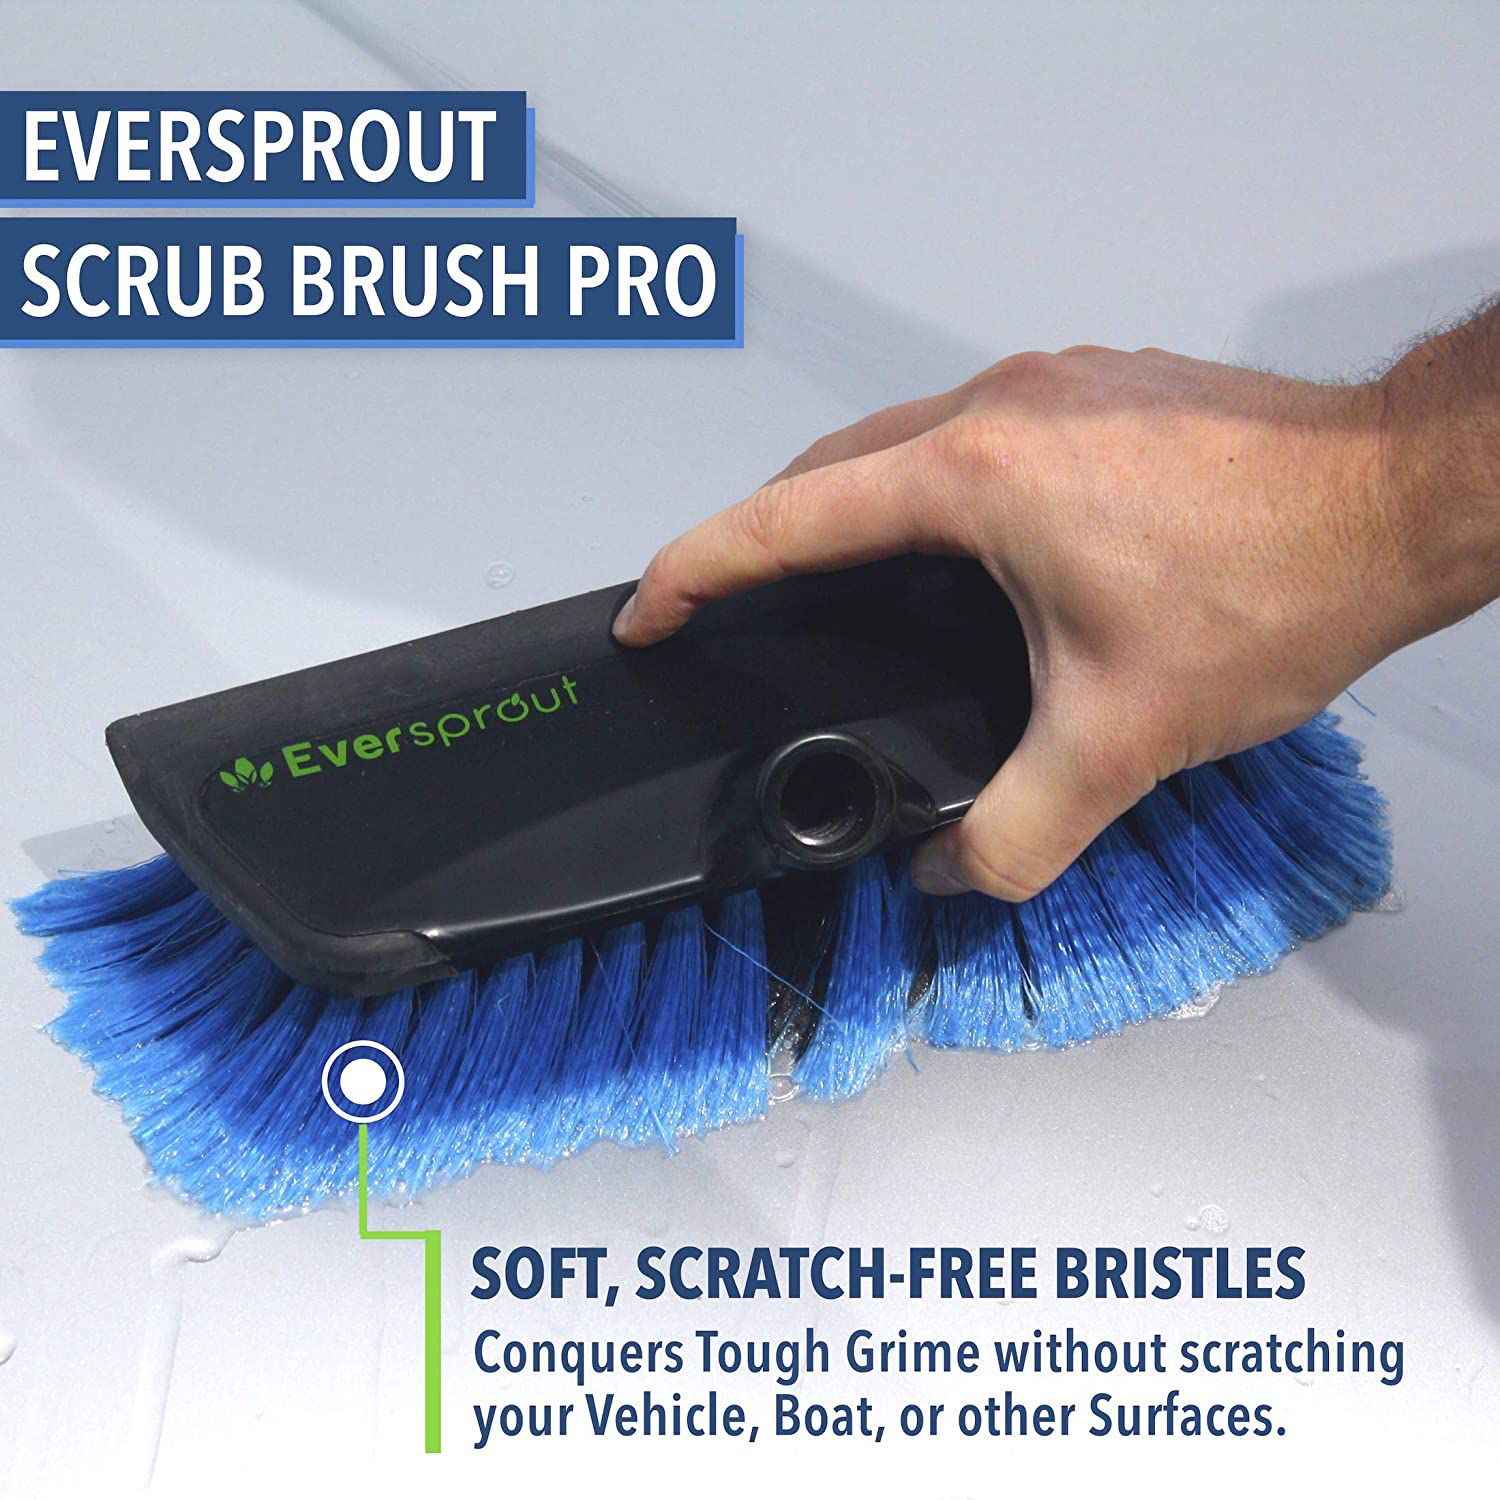 EVERSPROUT Premium Car Wash Kit | No-Scratch Scrub Brush Pro, Swivel Squeegee, Dual-Sided Carwash Mitts, No-Lint Microfiber Towels | Perfect for Cleaning Vehicle, RV, Boat, Windows | Pole Not Included